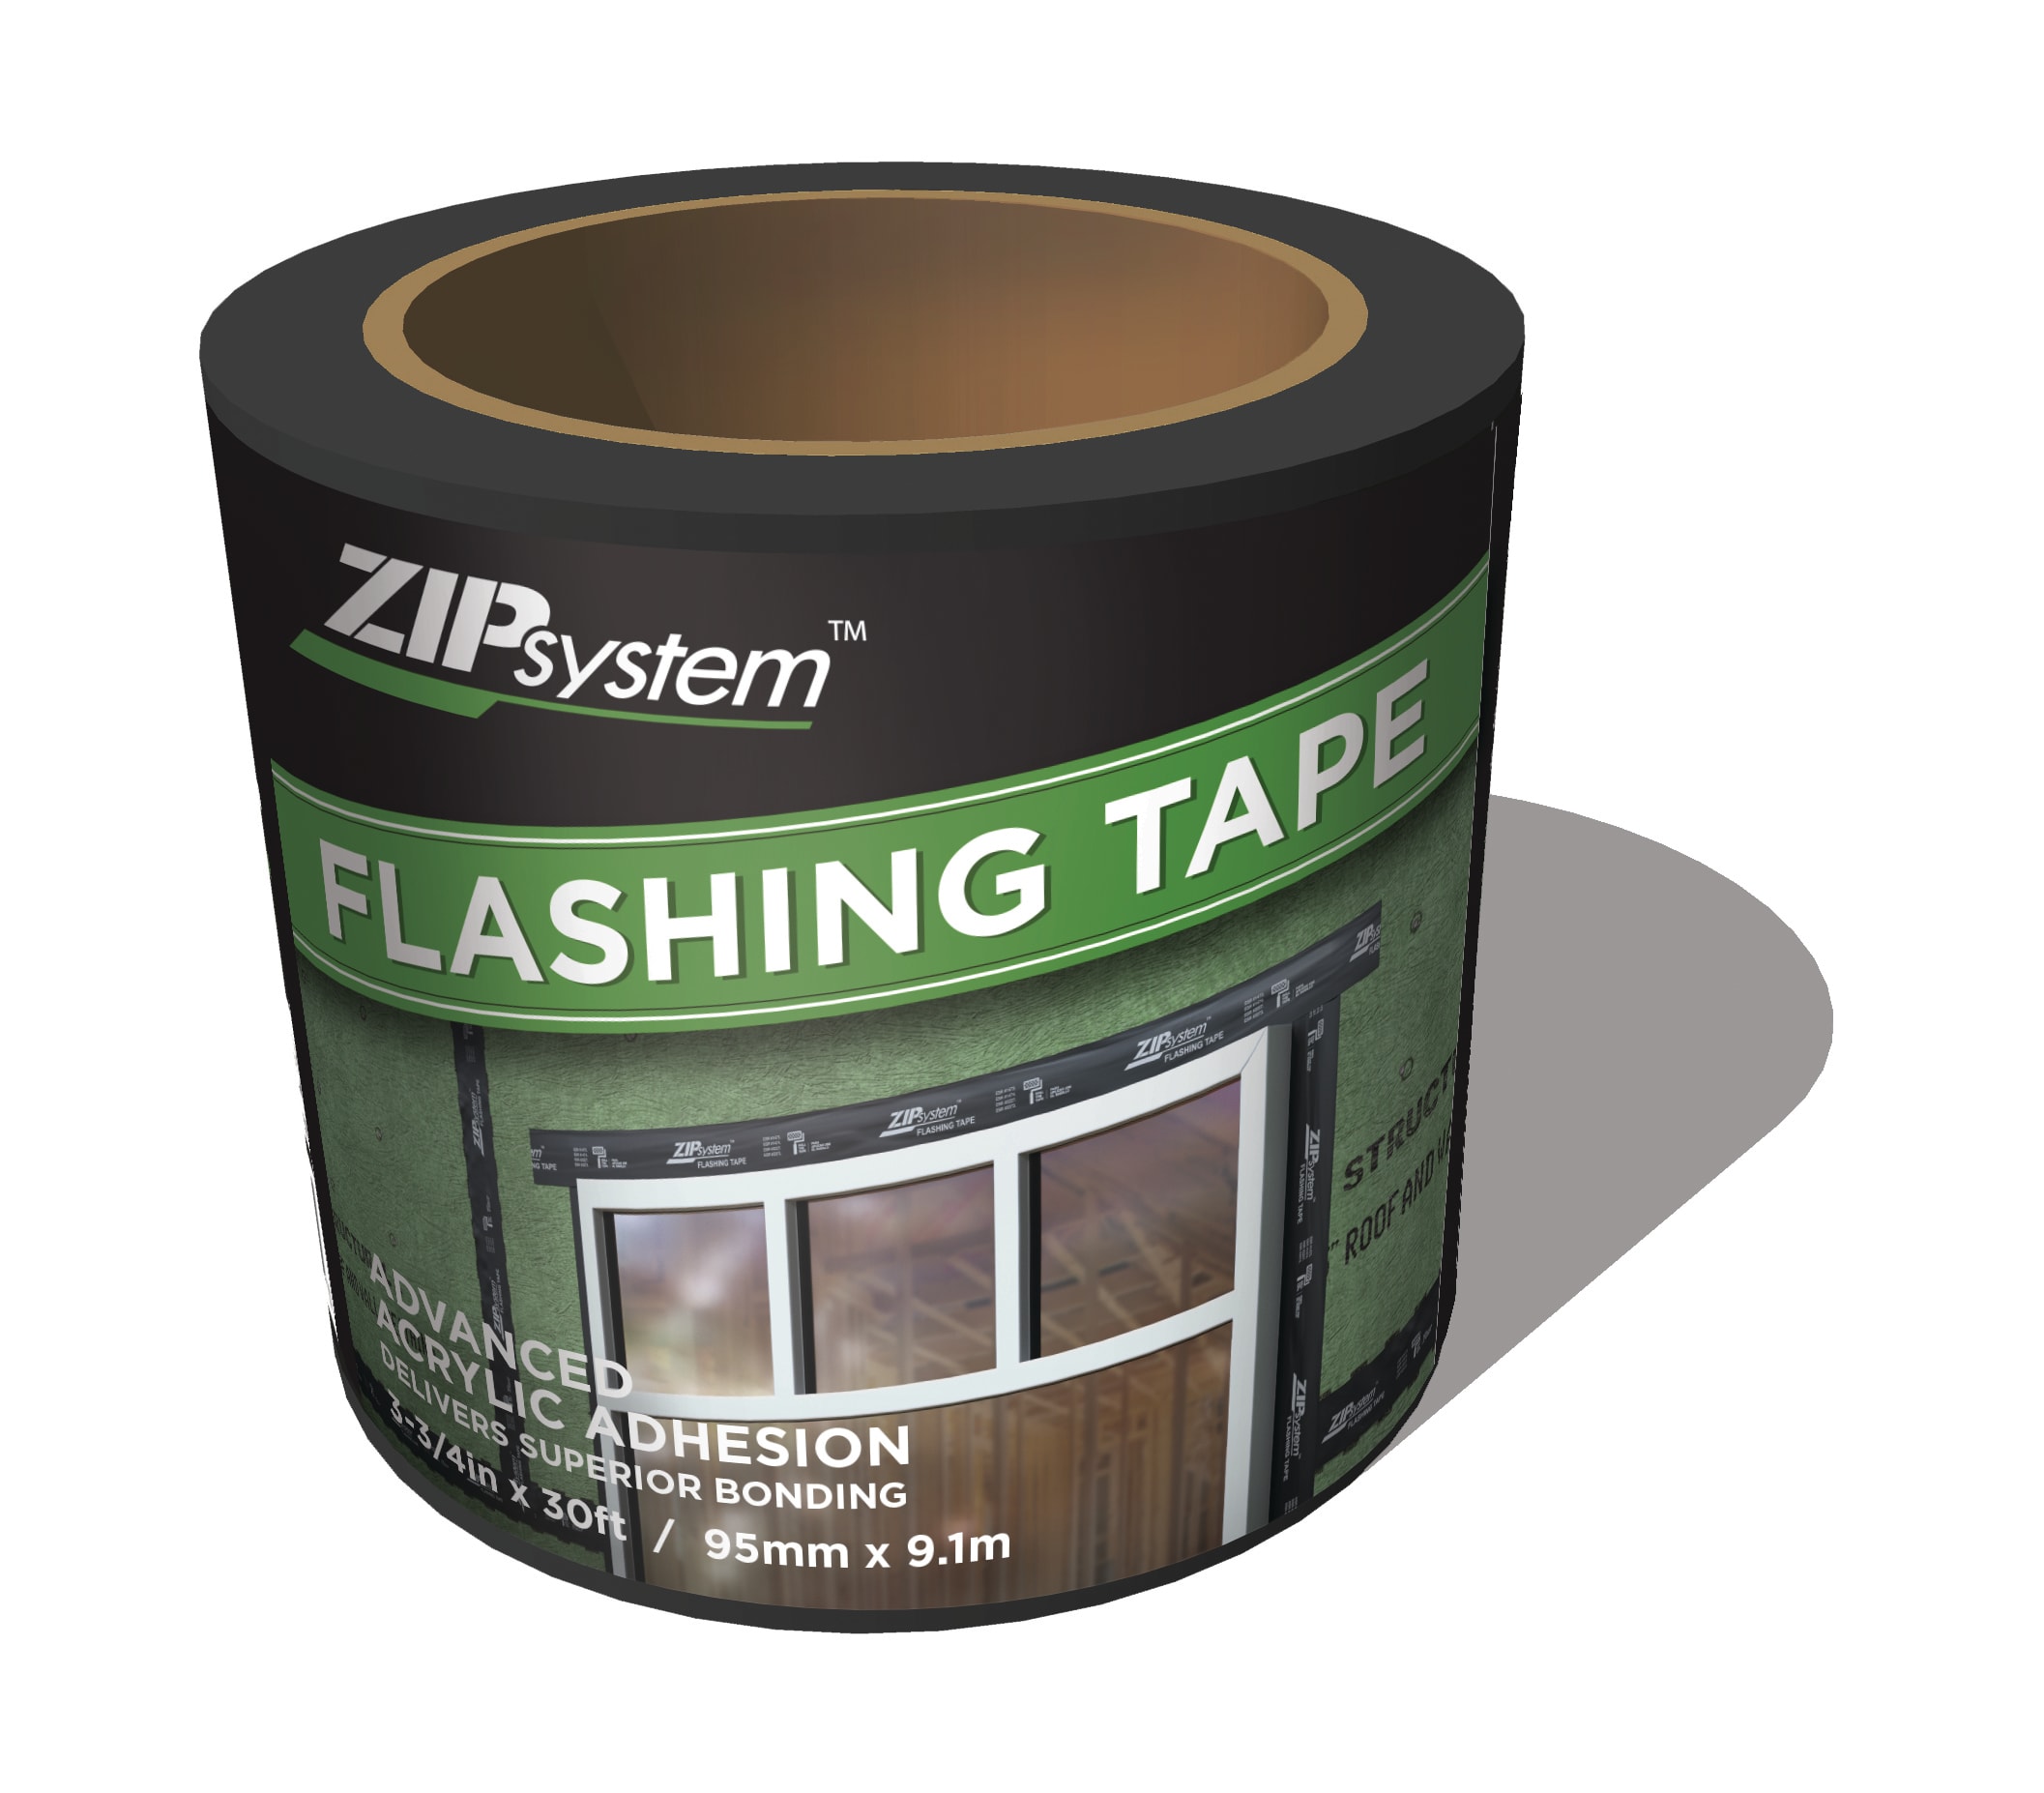 Huber Zip System Flashing Tape 6 Inches X 75 Feet Self-Adhesive For Rough 